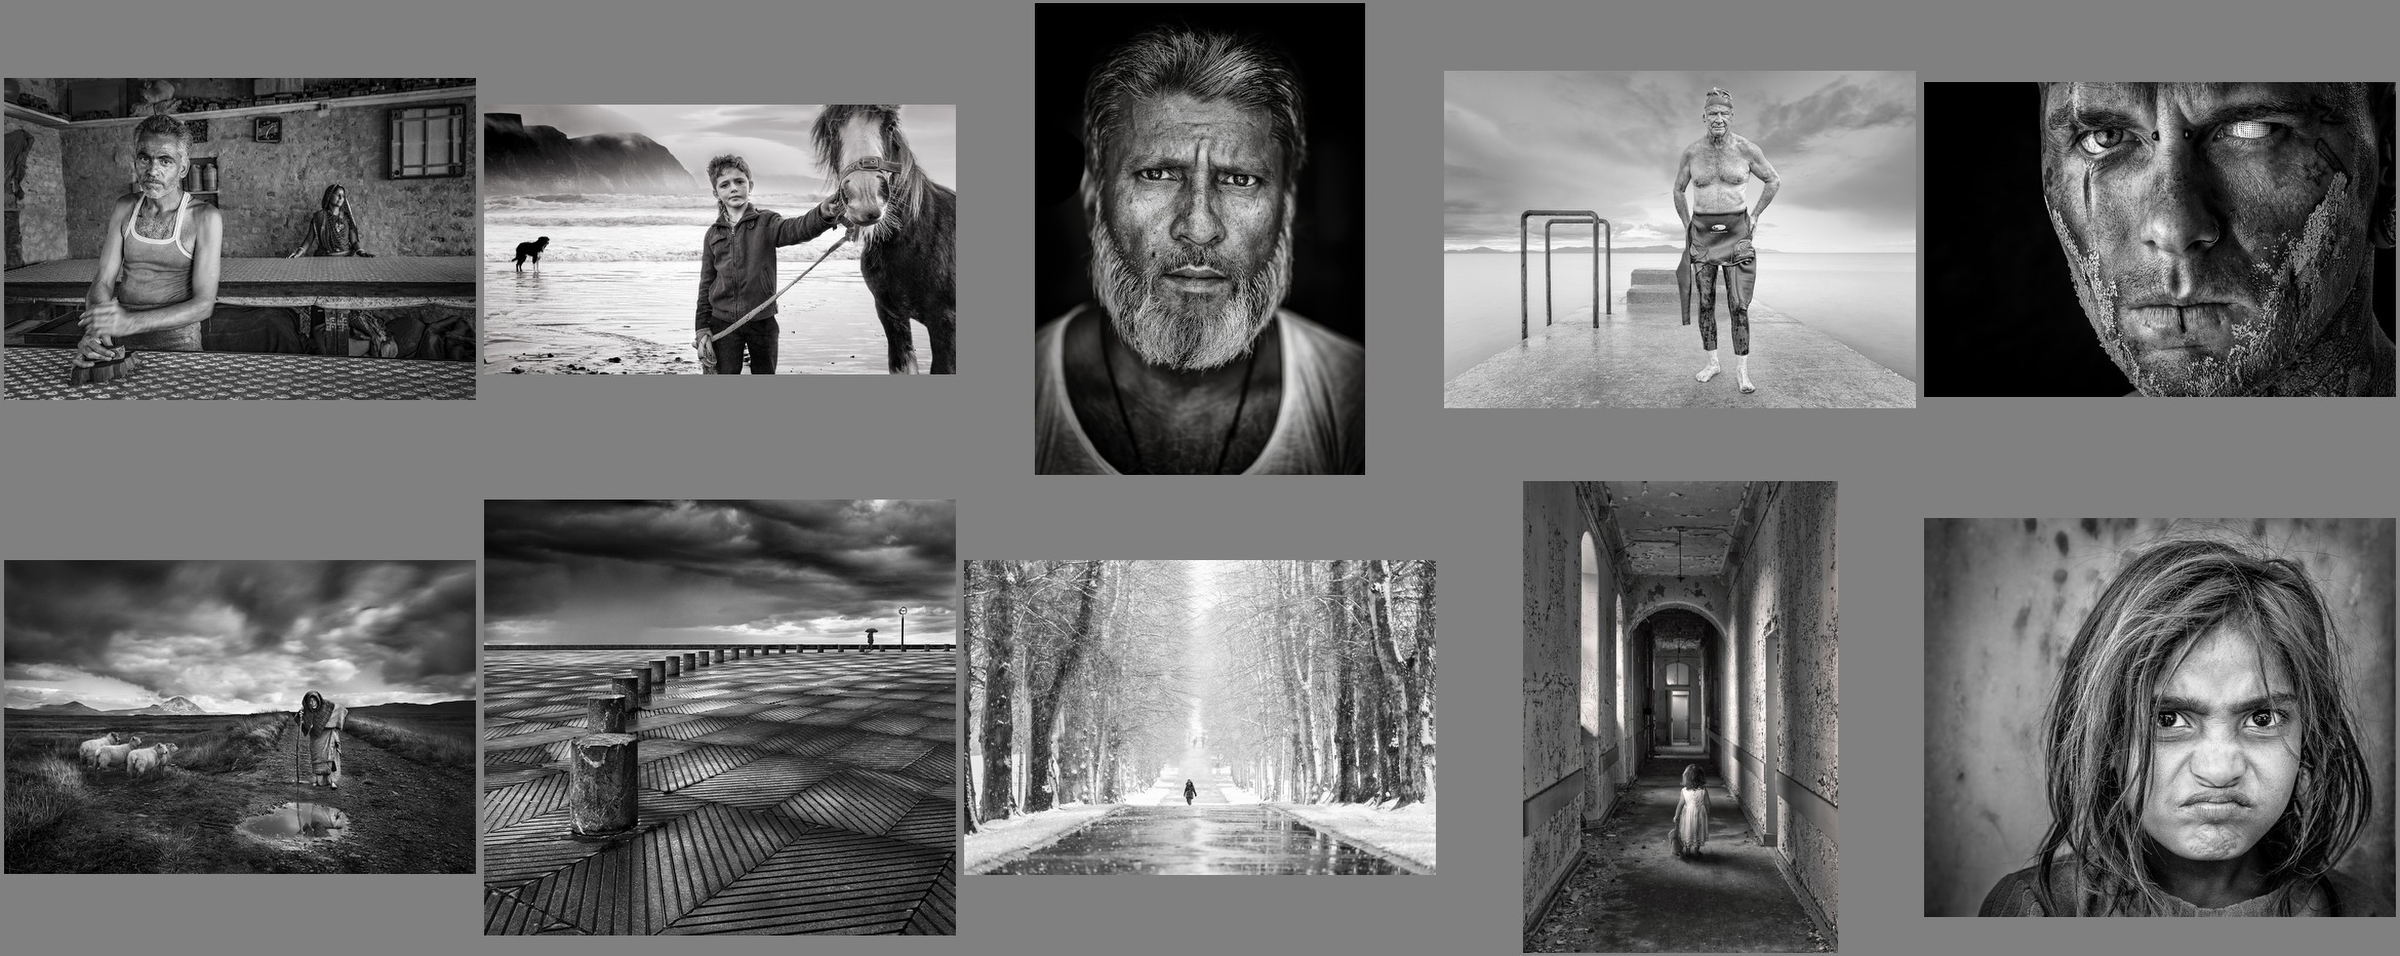 mono_Second_Place_Dundalk_Photographic_Society